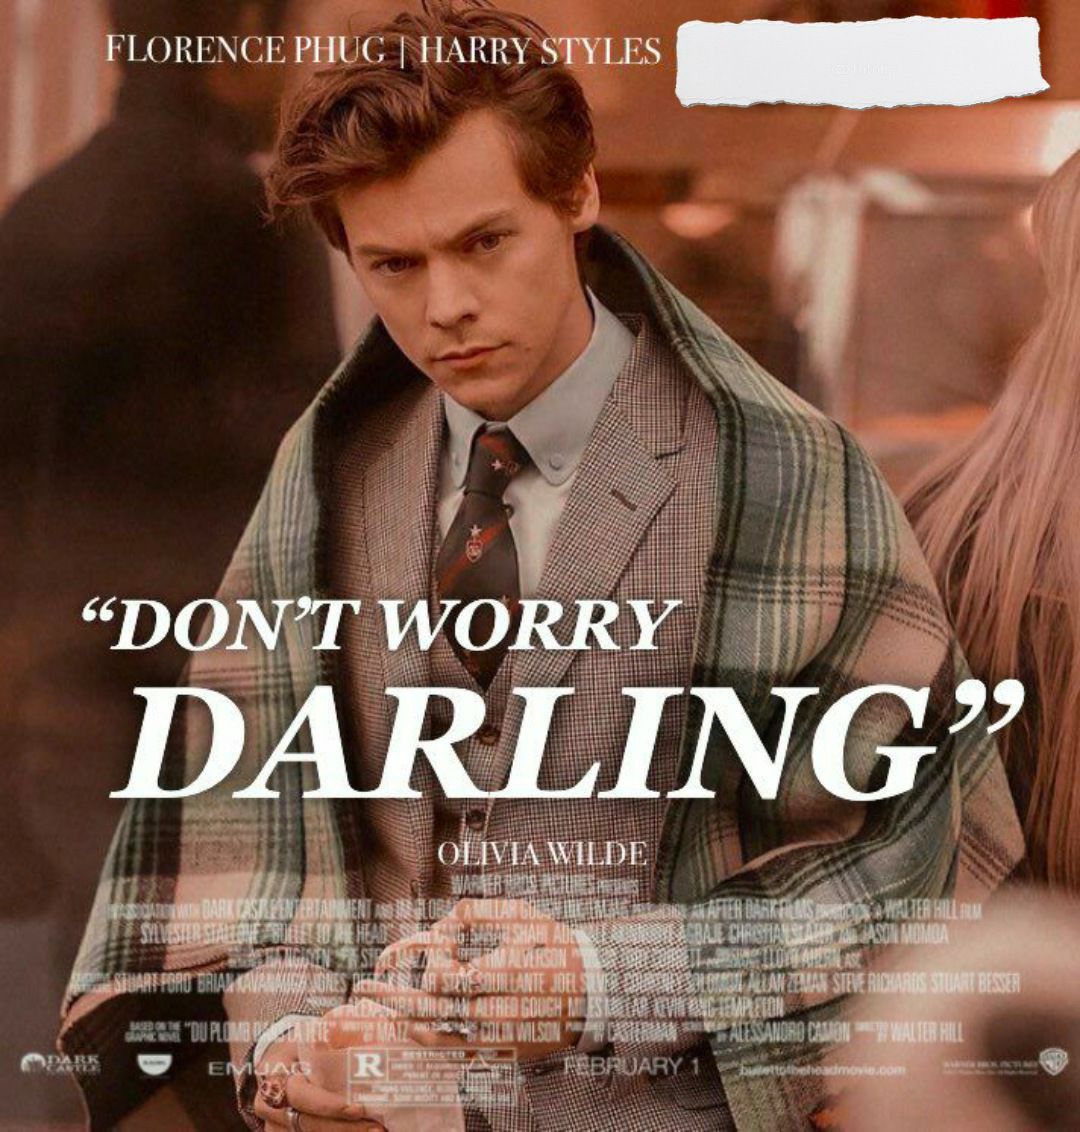 Don't worry Darling. Harry styles songs, Harry styles photo, Darling movie